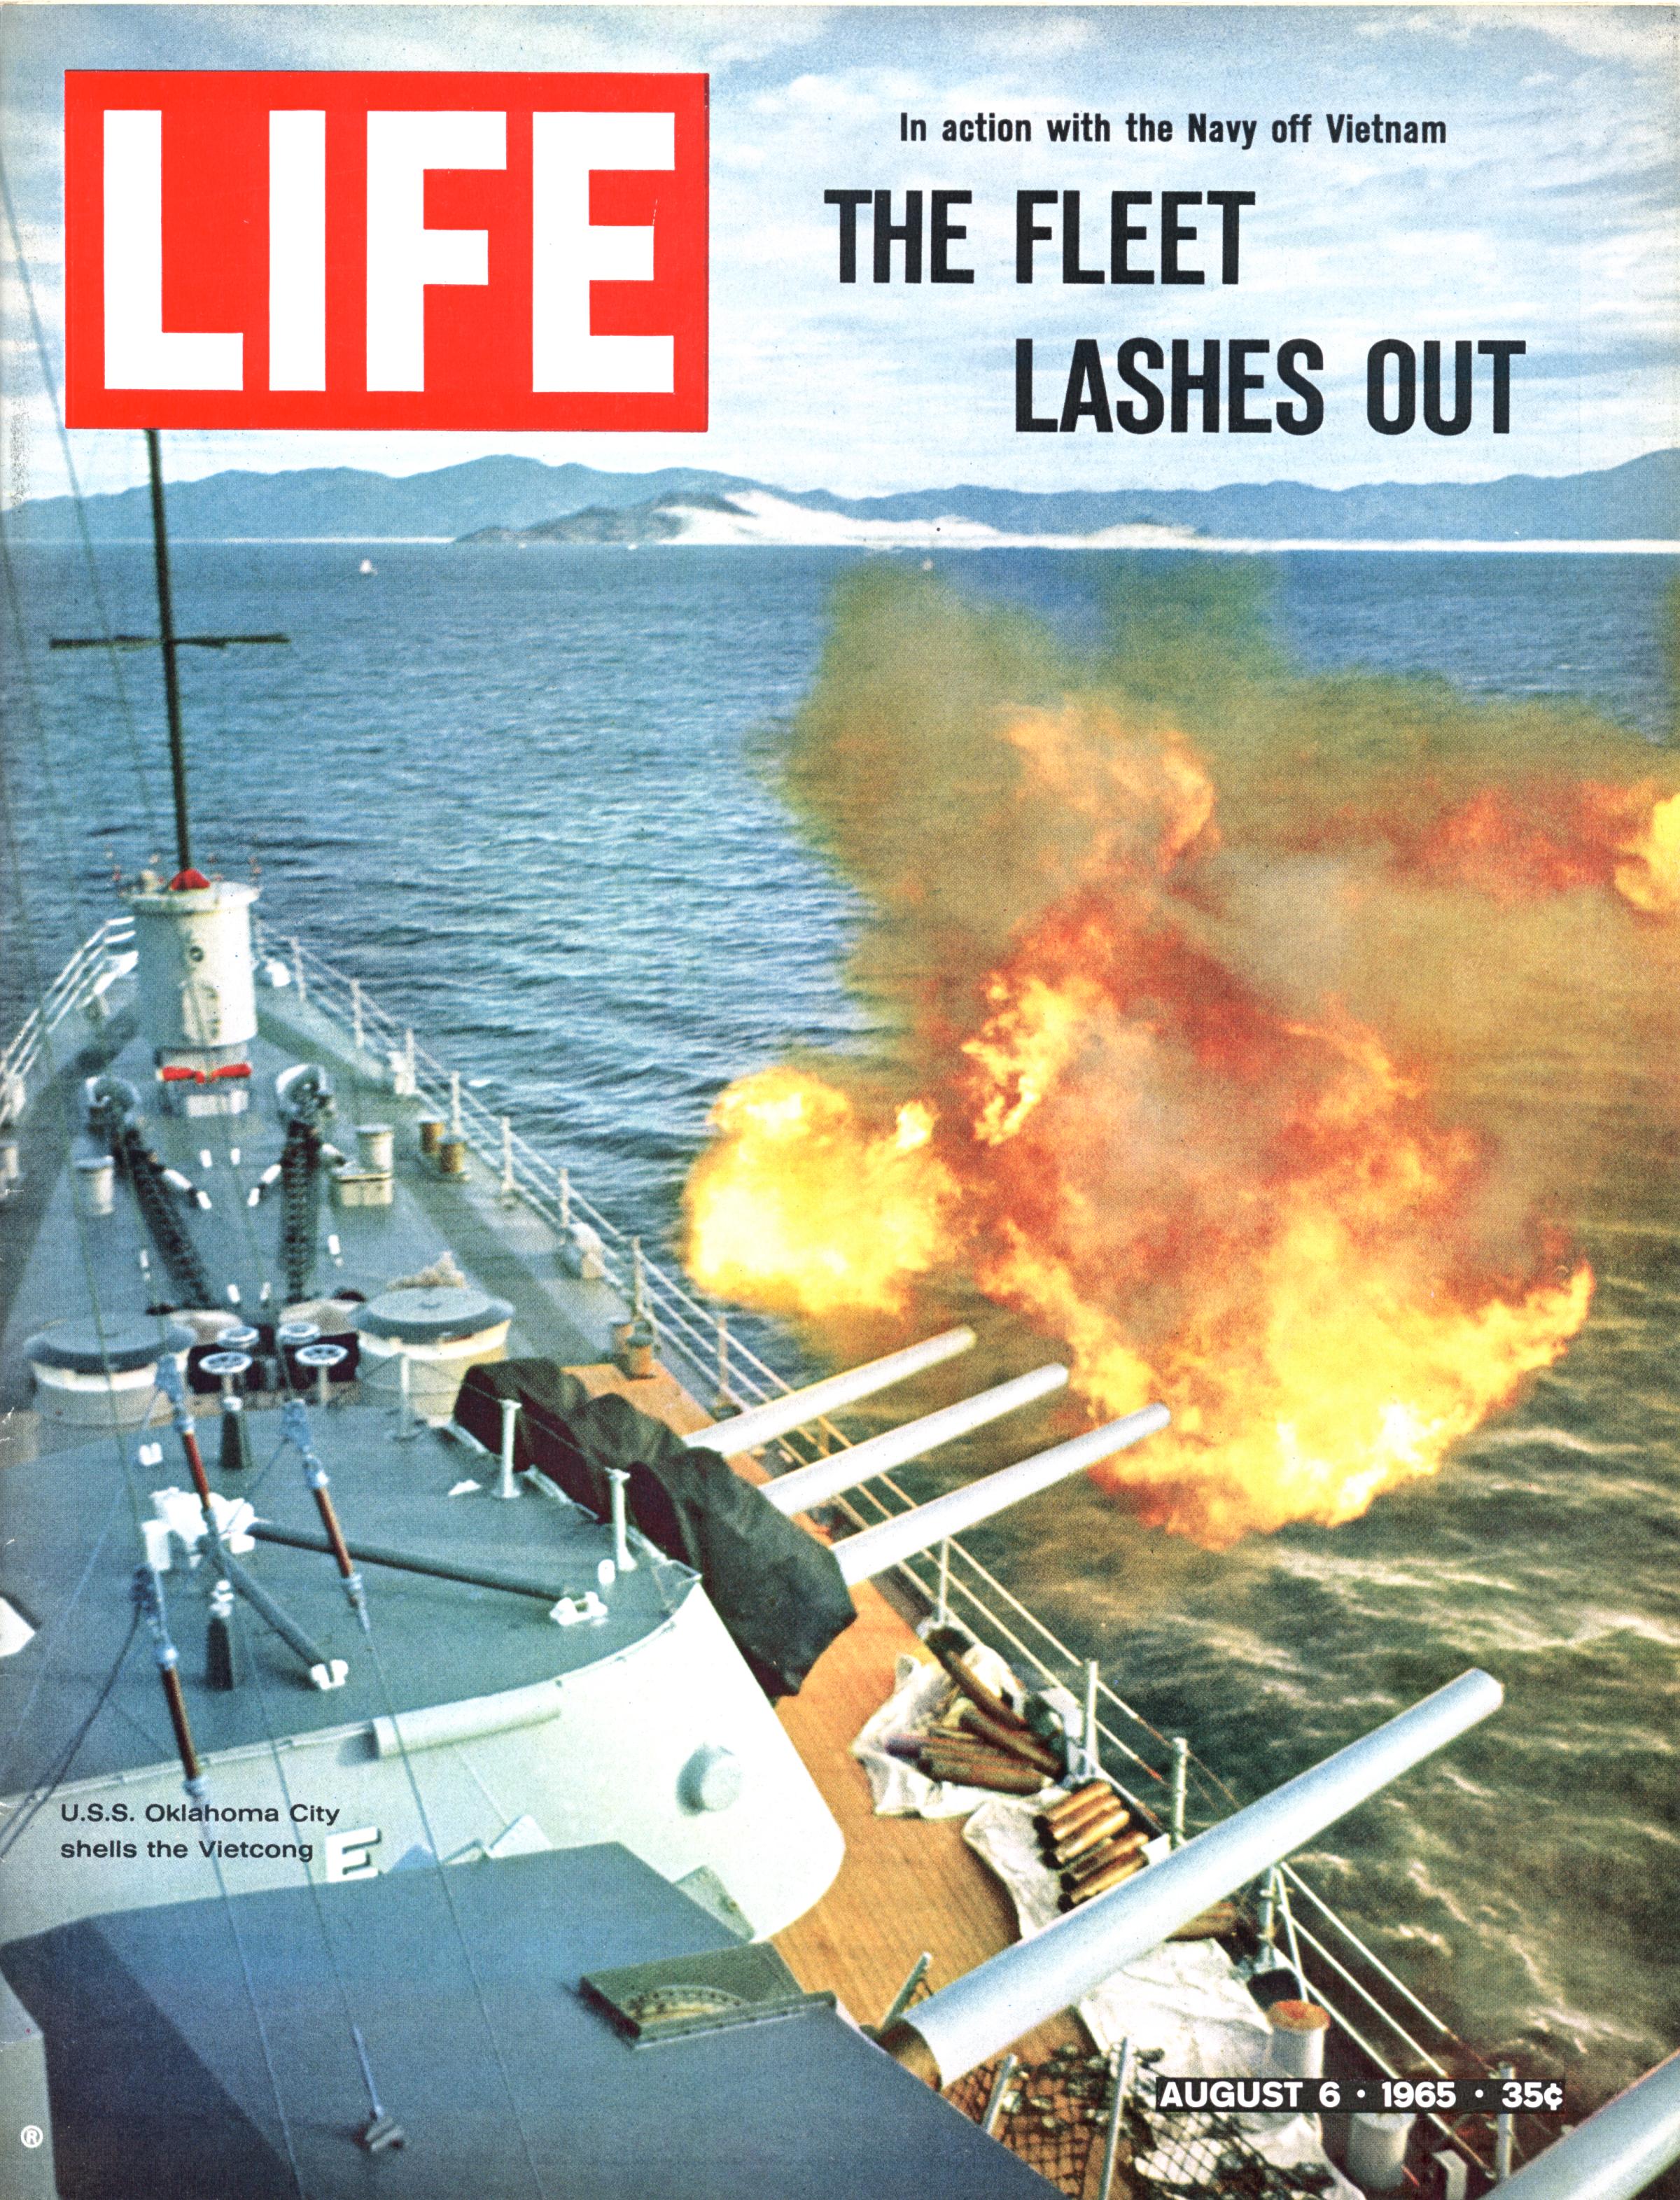 LIFE, August 6, 1965